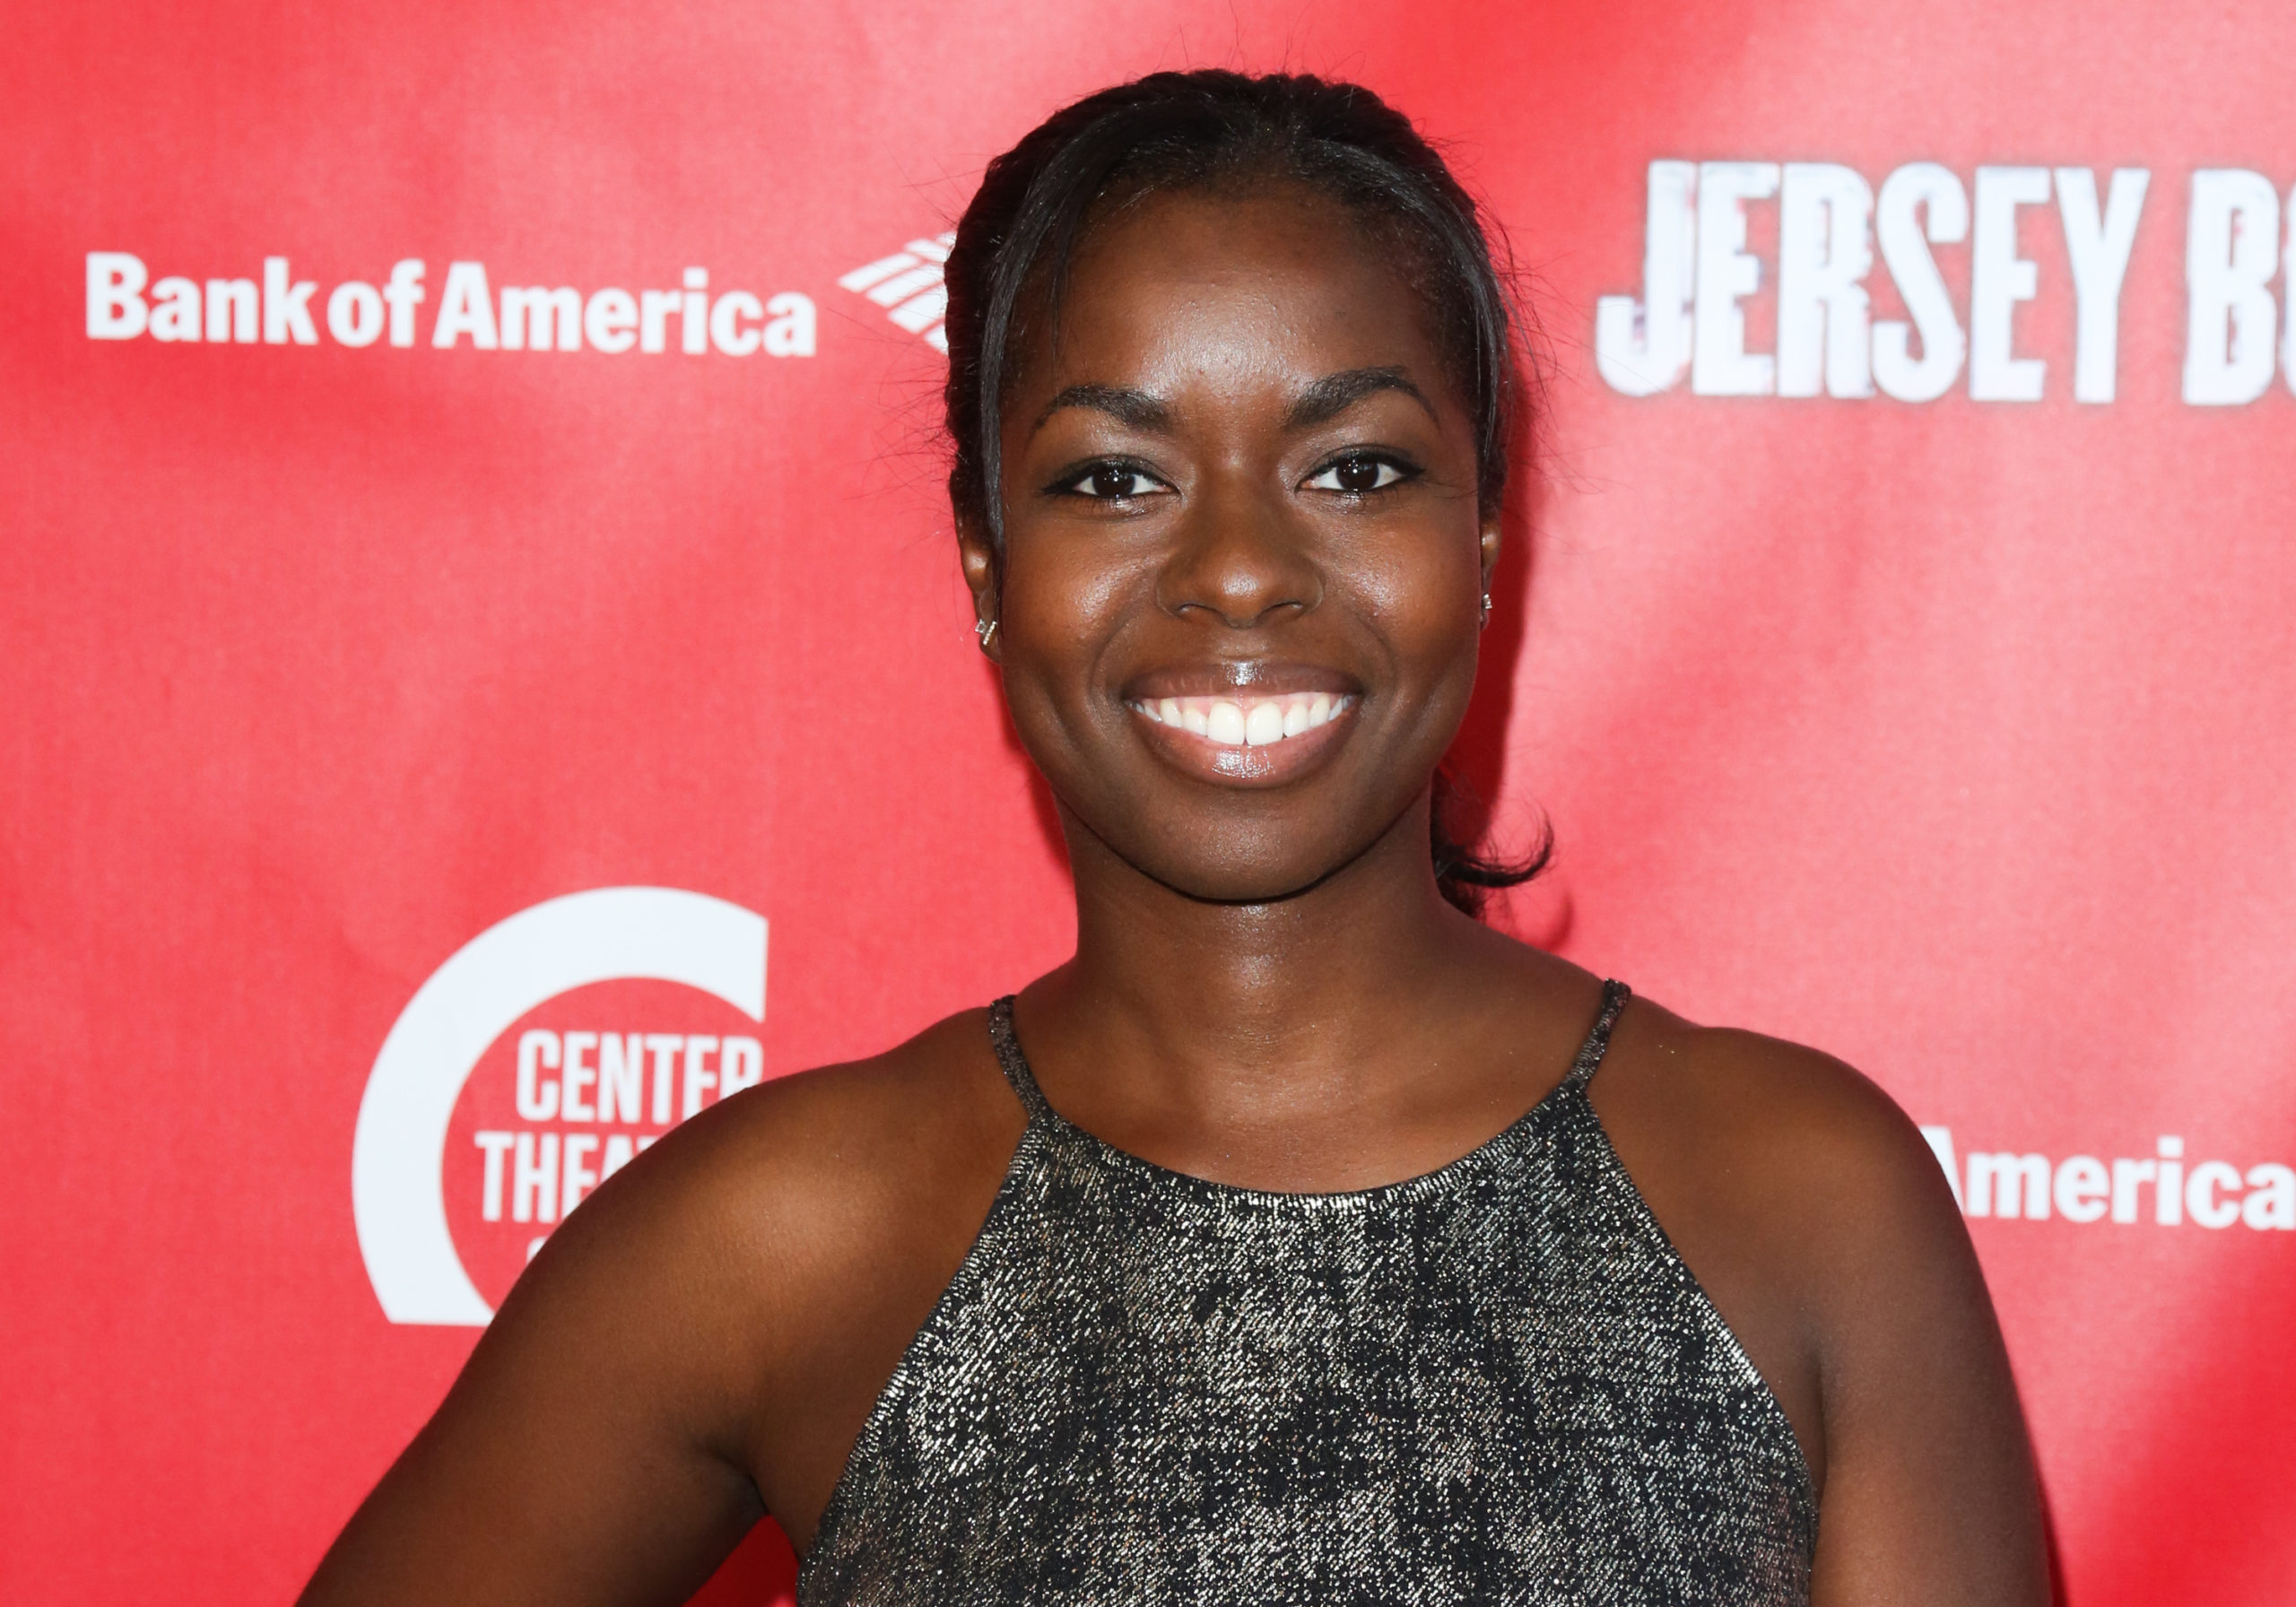 Camille Winbush Revealed on Social Media She Started an "Only Fans...